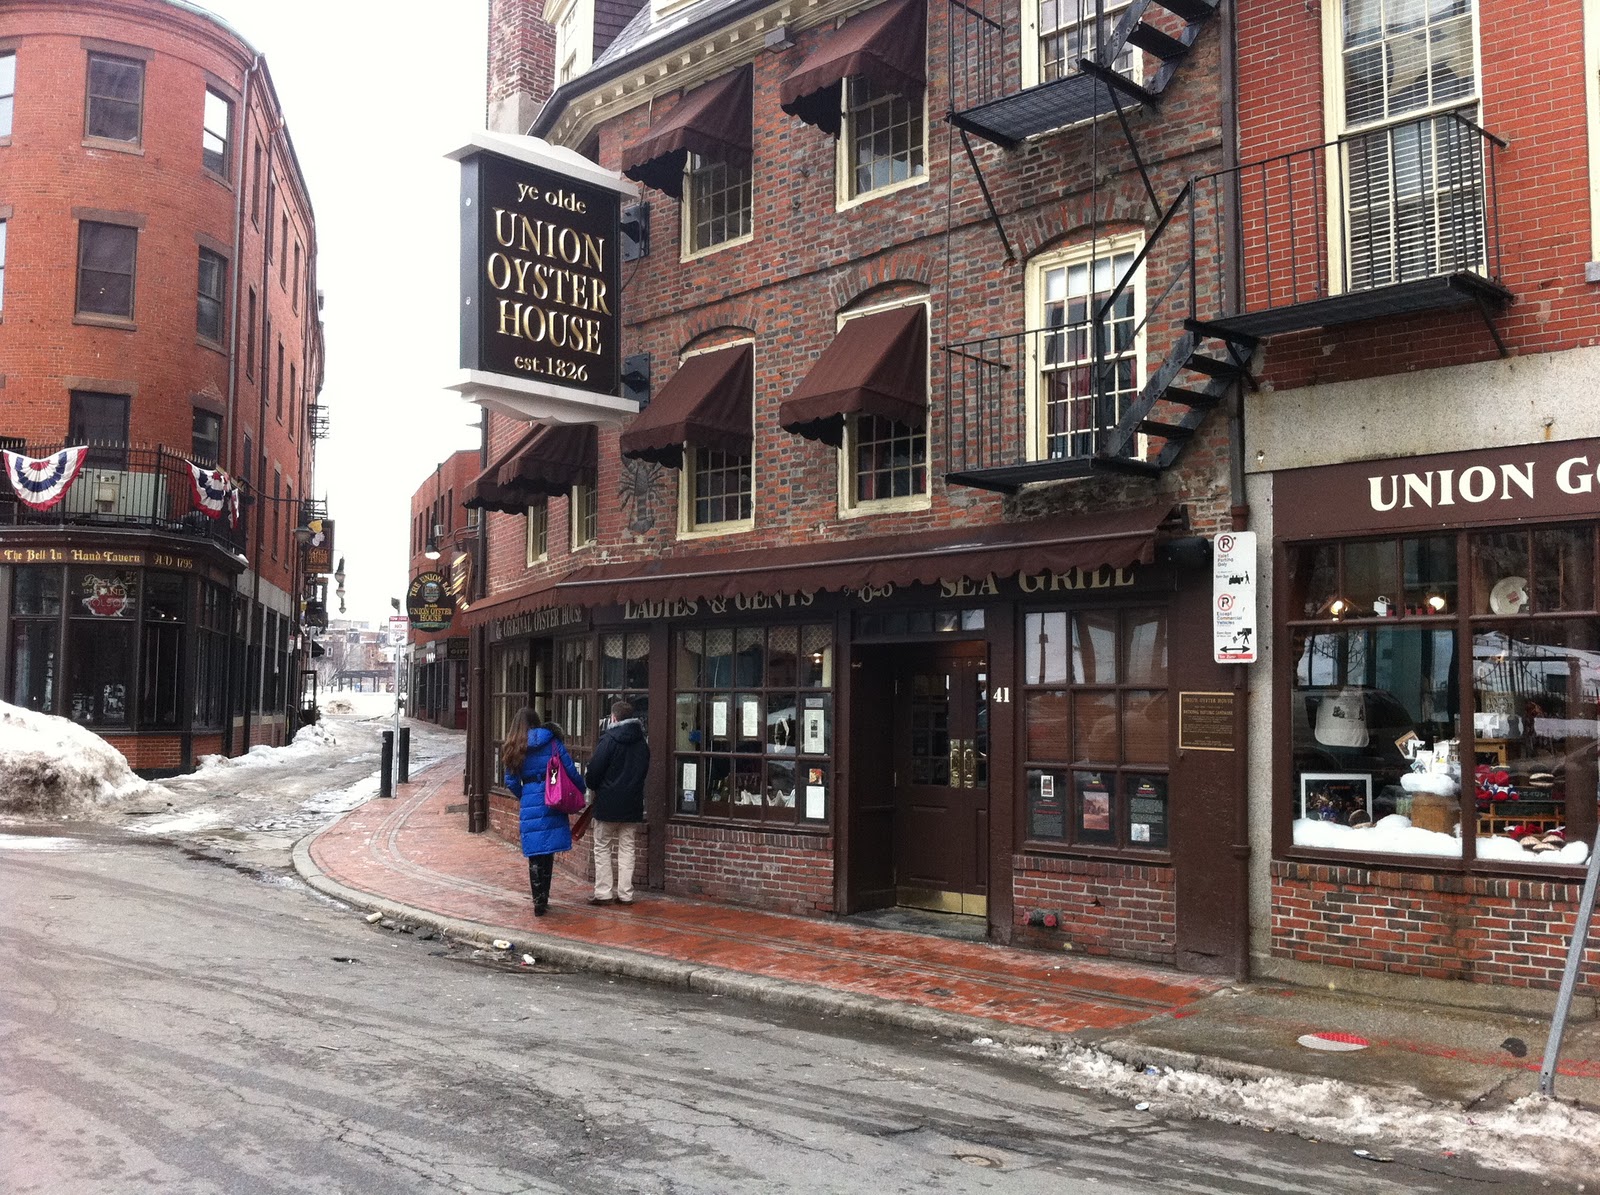 BOSTON PHOTO GALLERY: Union Oyster House1600 x 1195